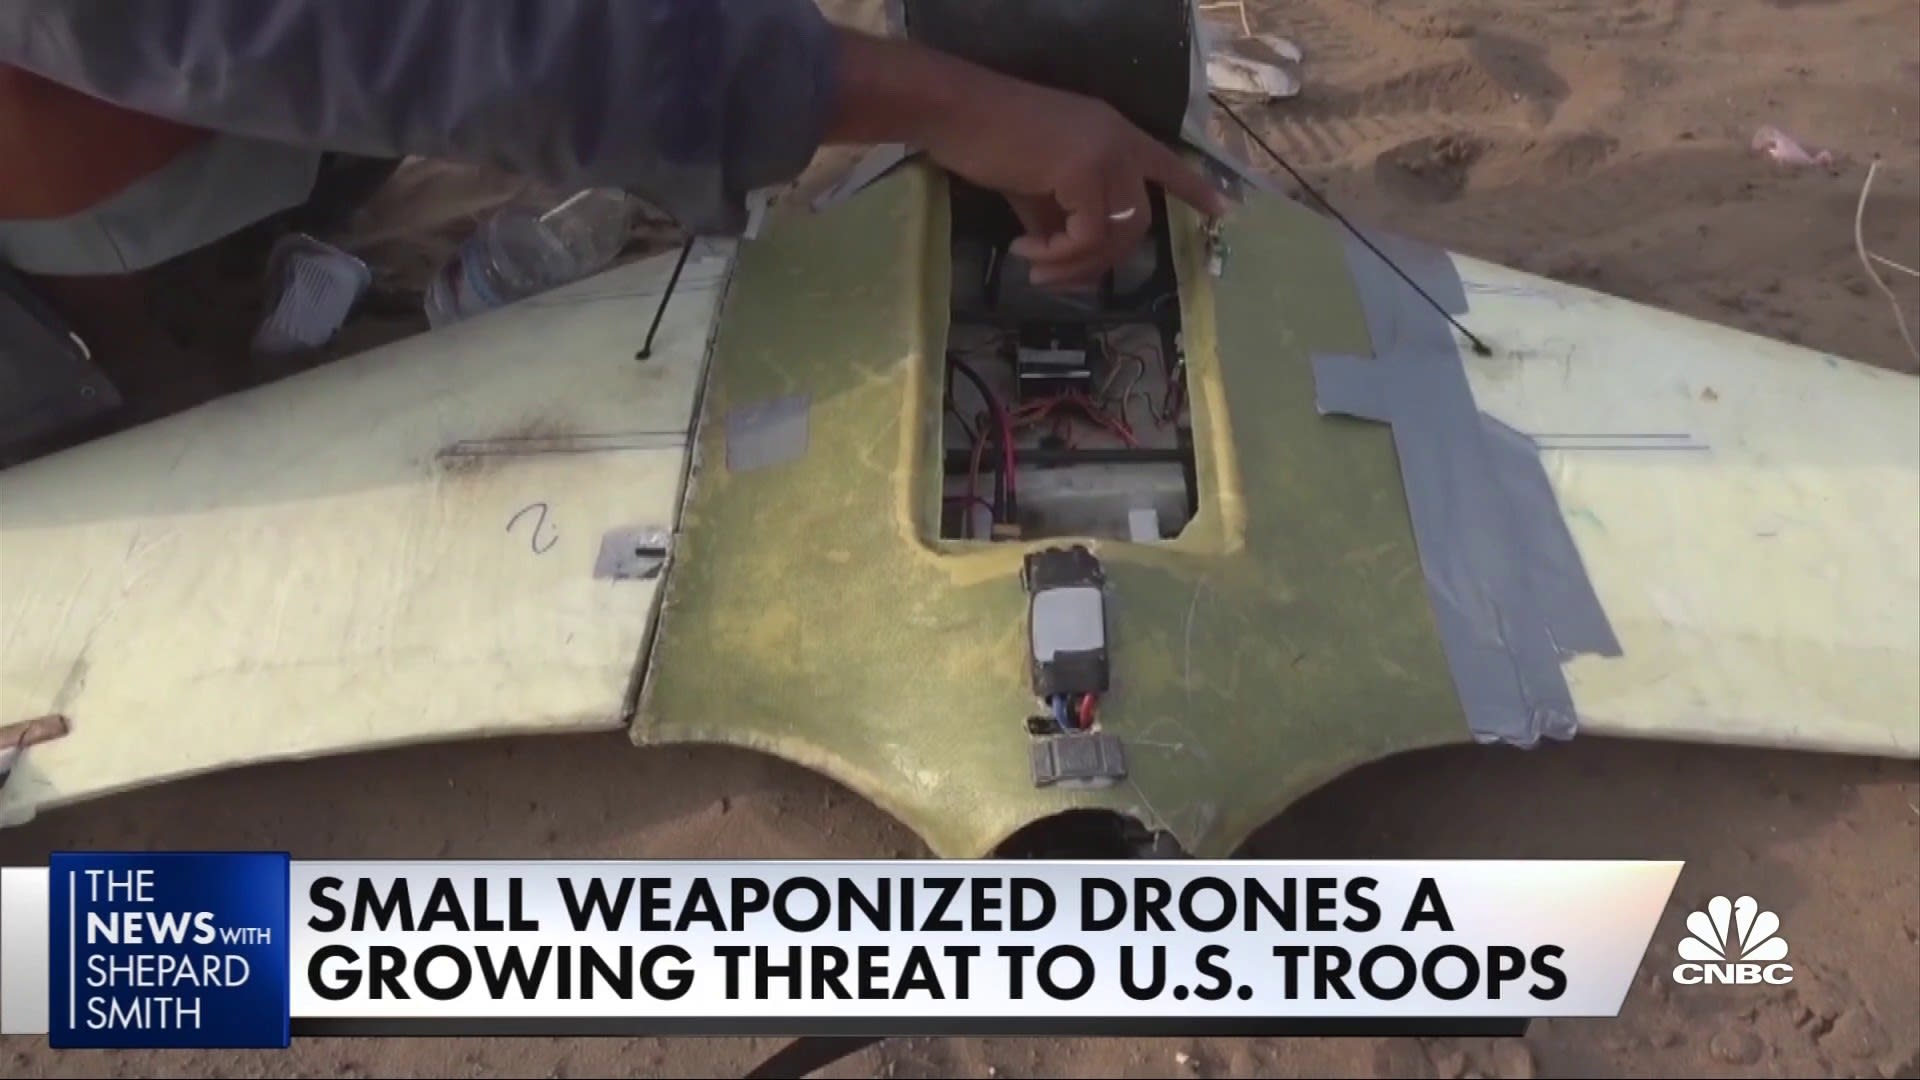 Dangers faces from cheap, explosive drones